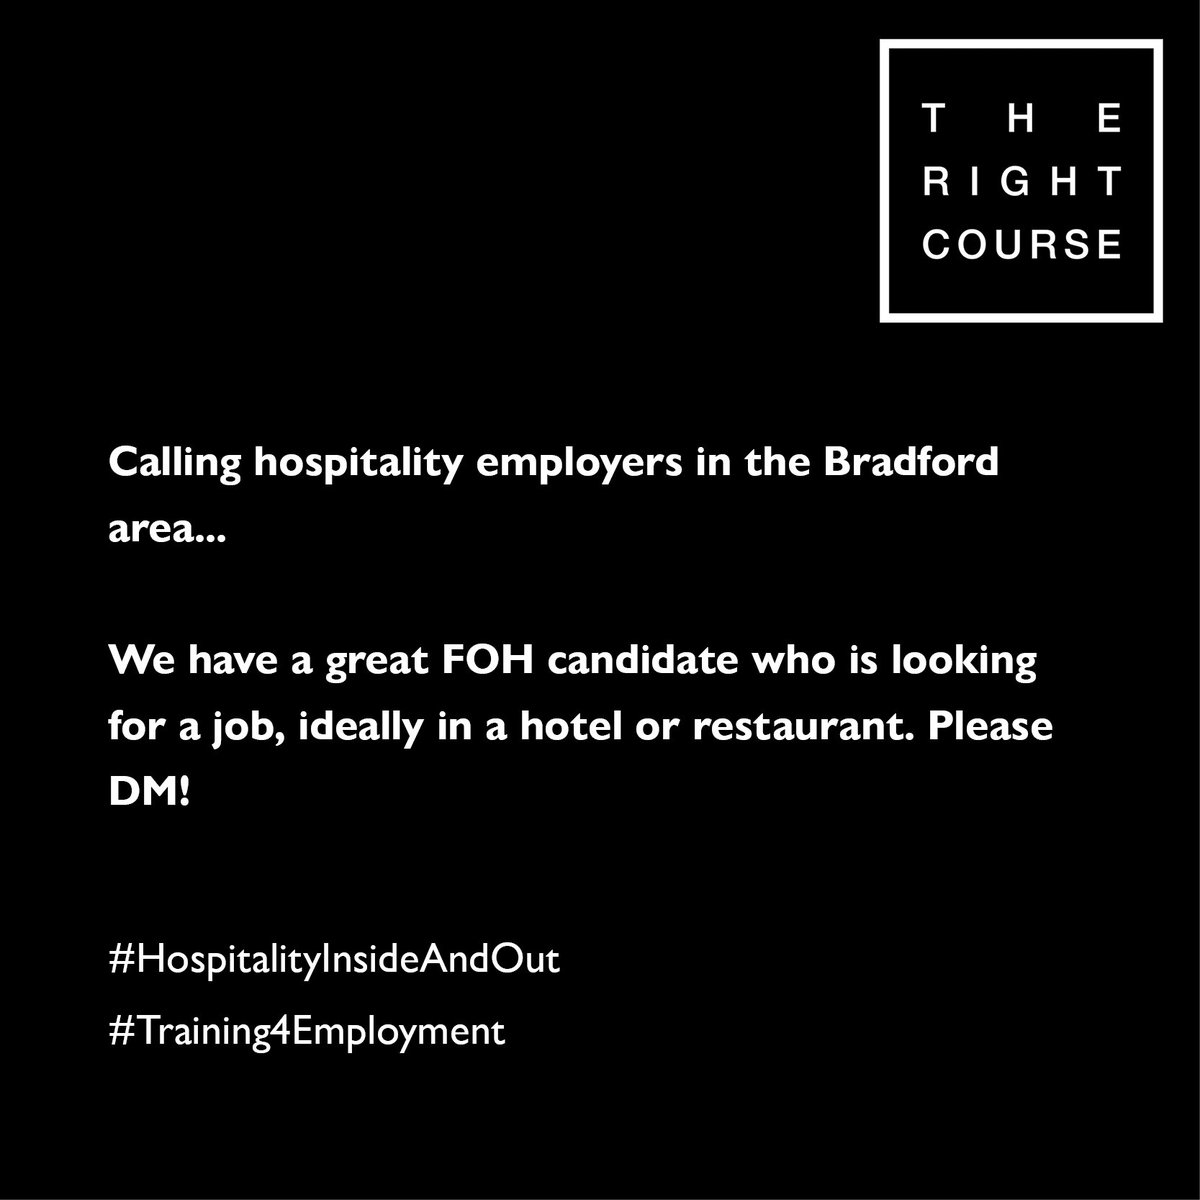 We're looking for a hotel or restaurant in the Bradford area that would be willing to give one of our graduates a chance. They have front of house experience from Bertie's, our training restaurant at @hmp_lincoln. A great team member & willing to learn. Please DM for details.